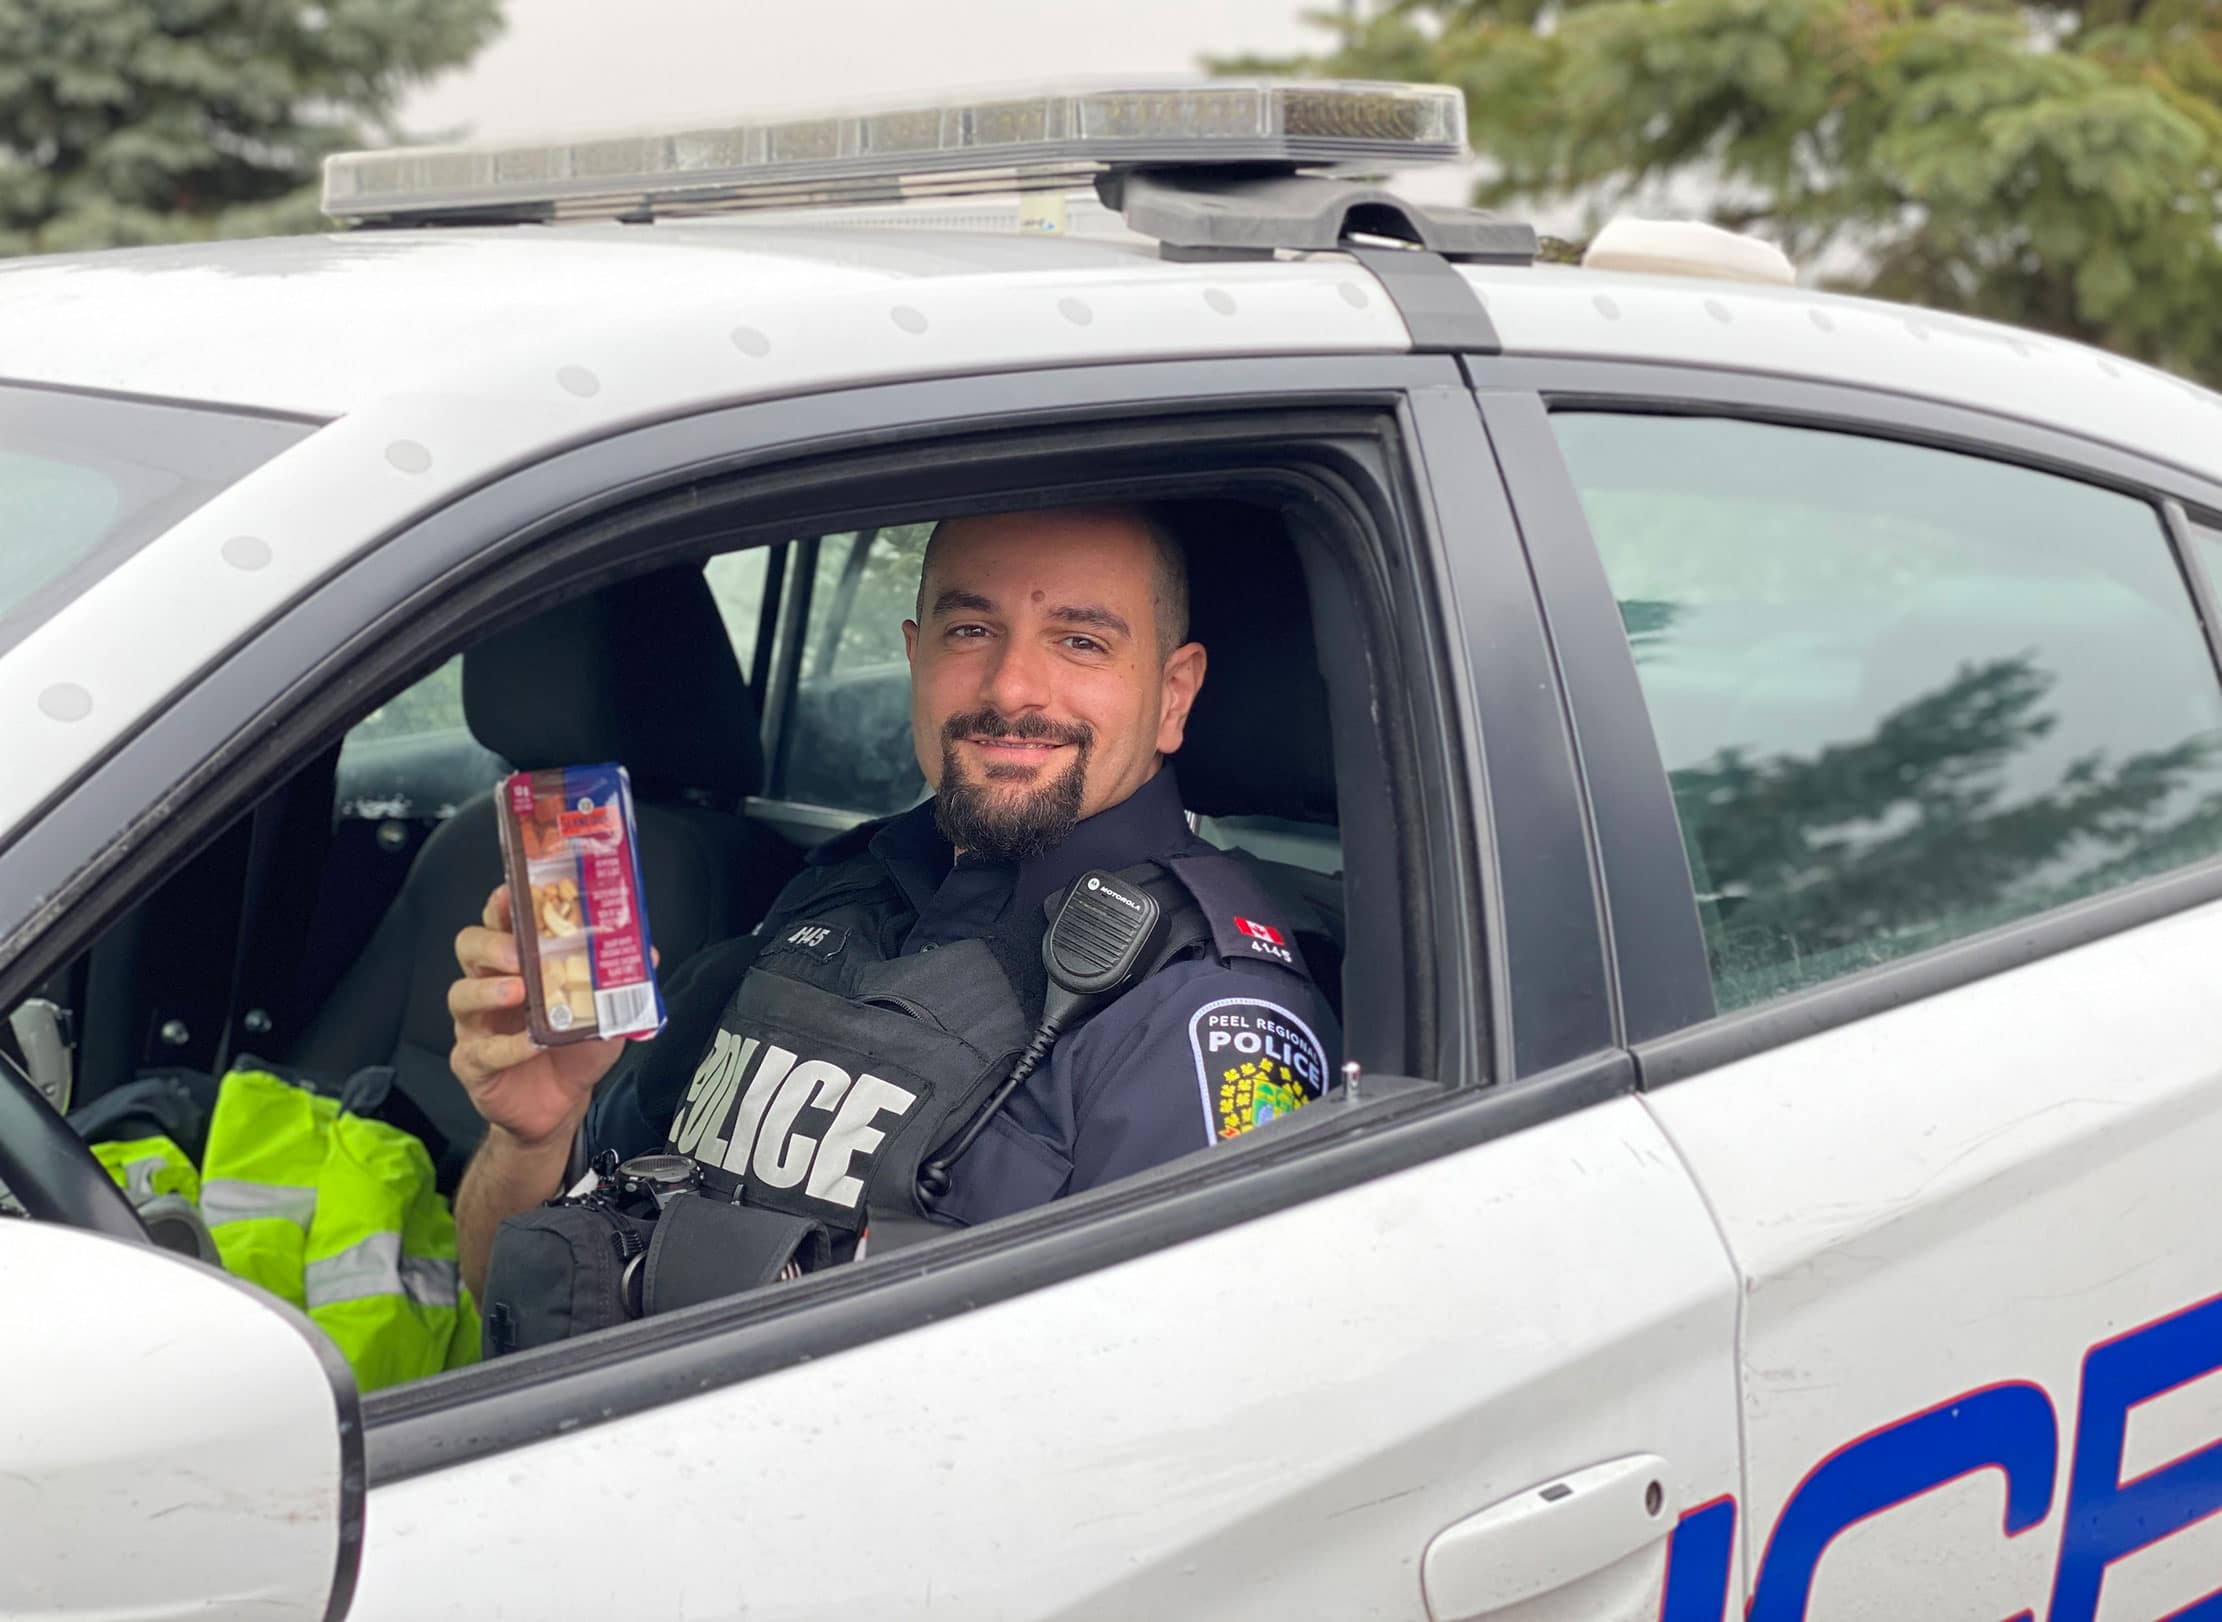 Police Officer receiving a Schneiders' Protein Pack.